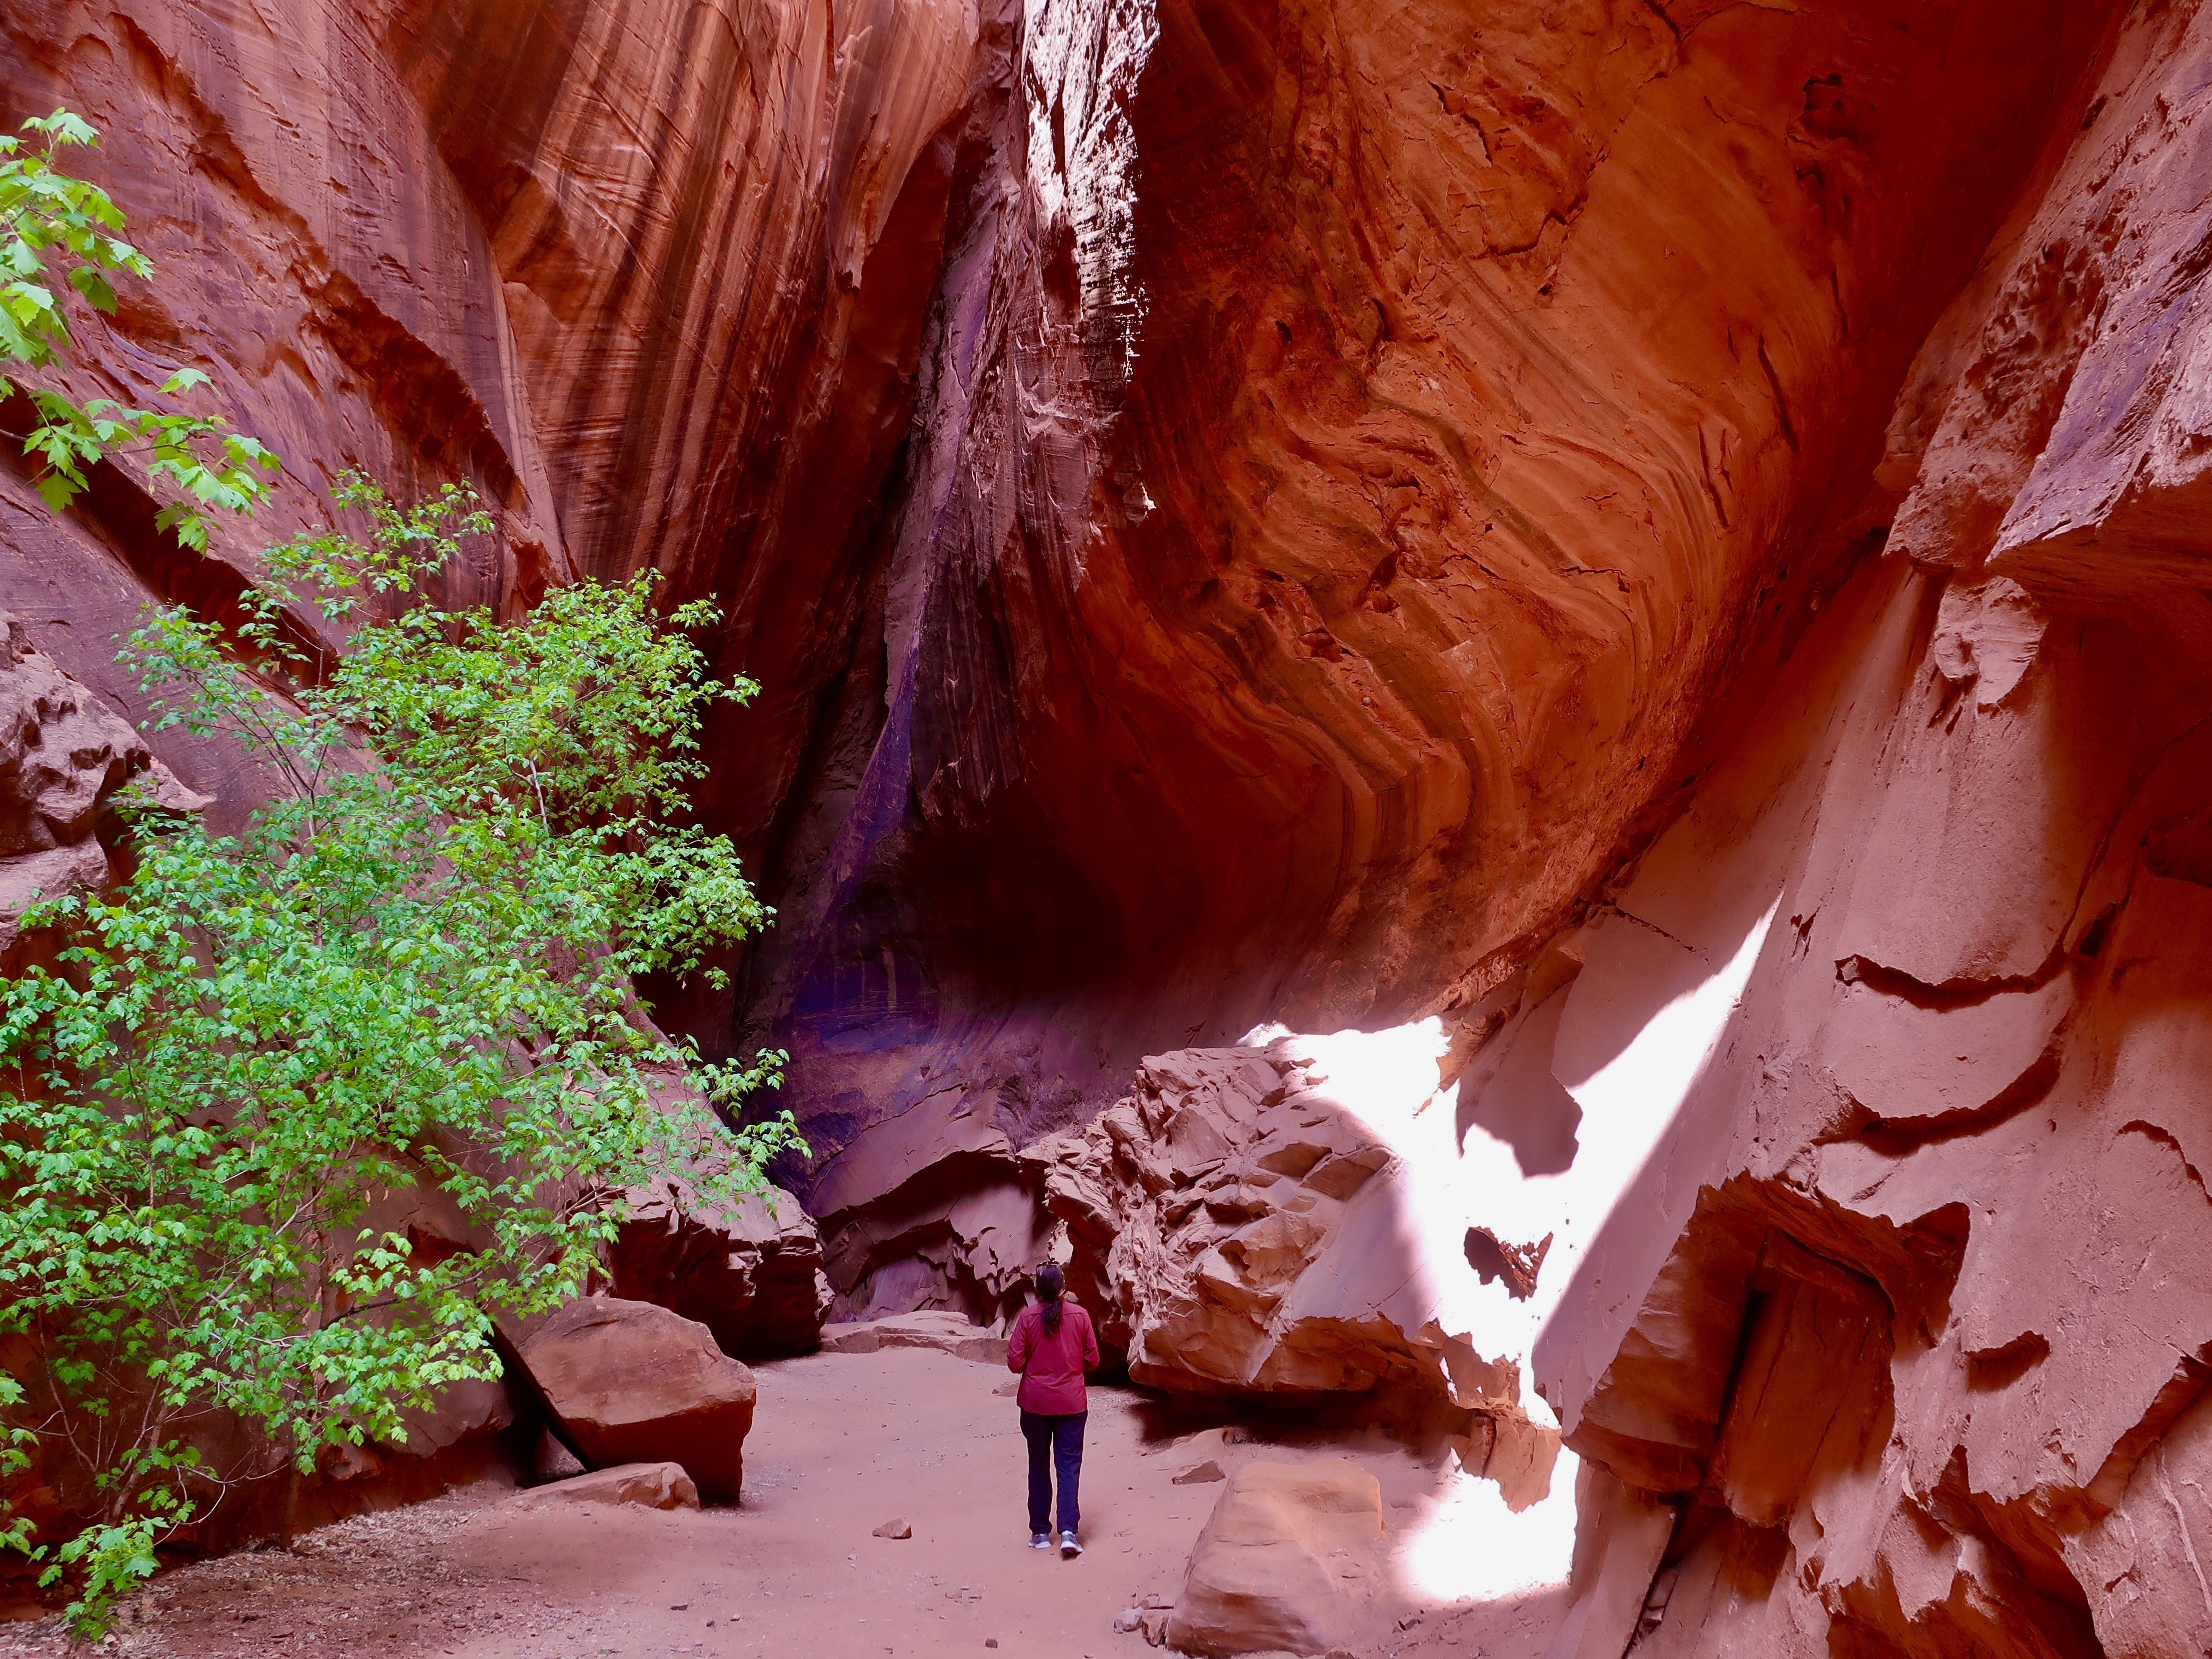 Photo of Singing Canyon, a slot canyon along the Burr Trail road in Utah by Curt Mekemson.